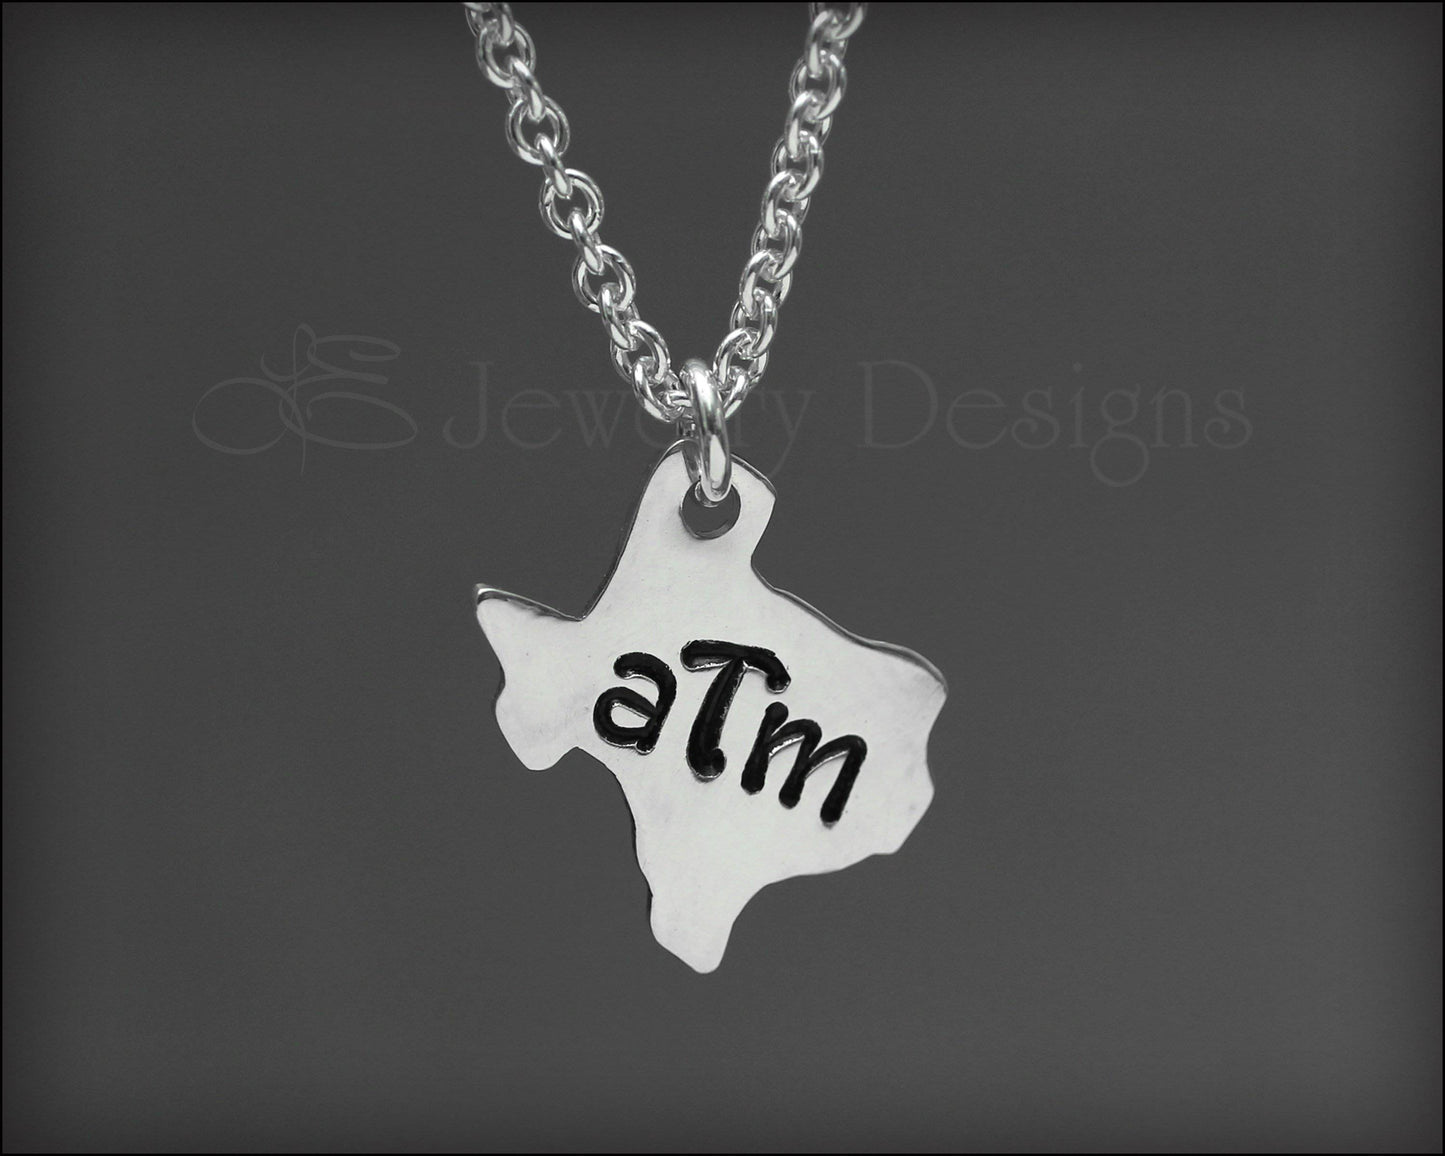 Tiny Sterling Silver Texas Necklace - LE Jewelry Designs